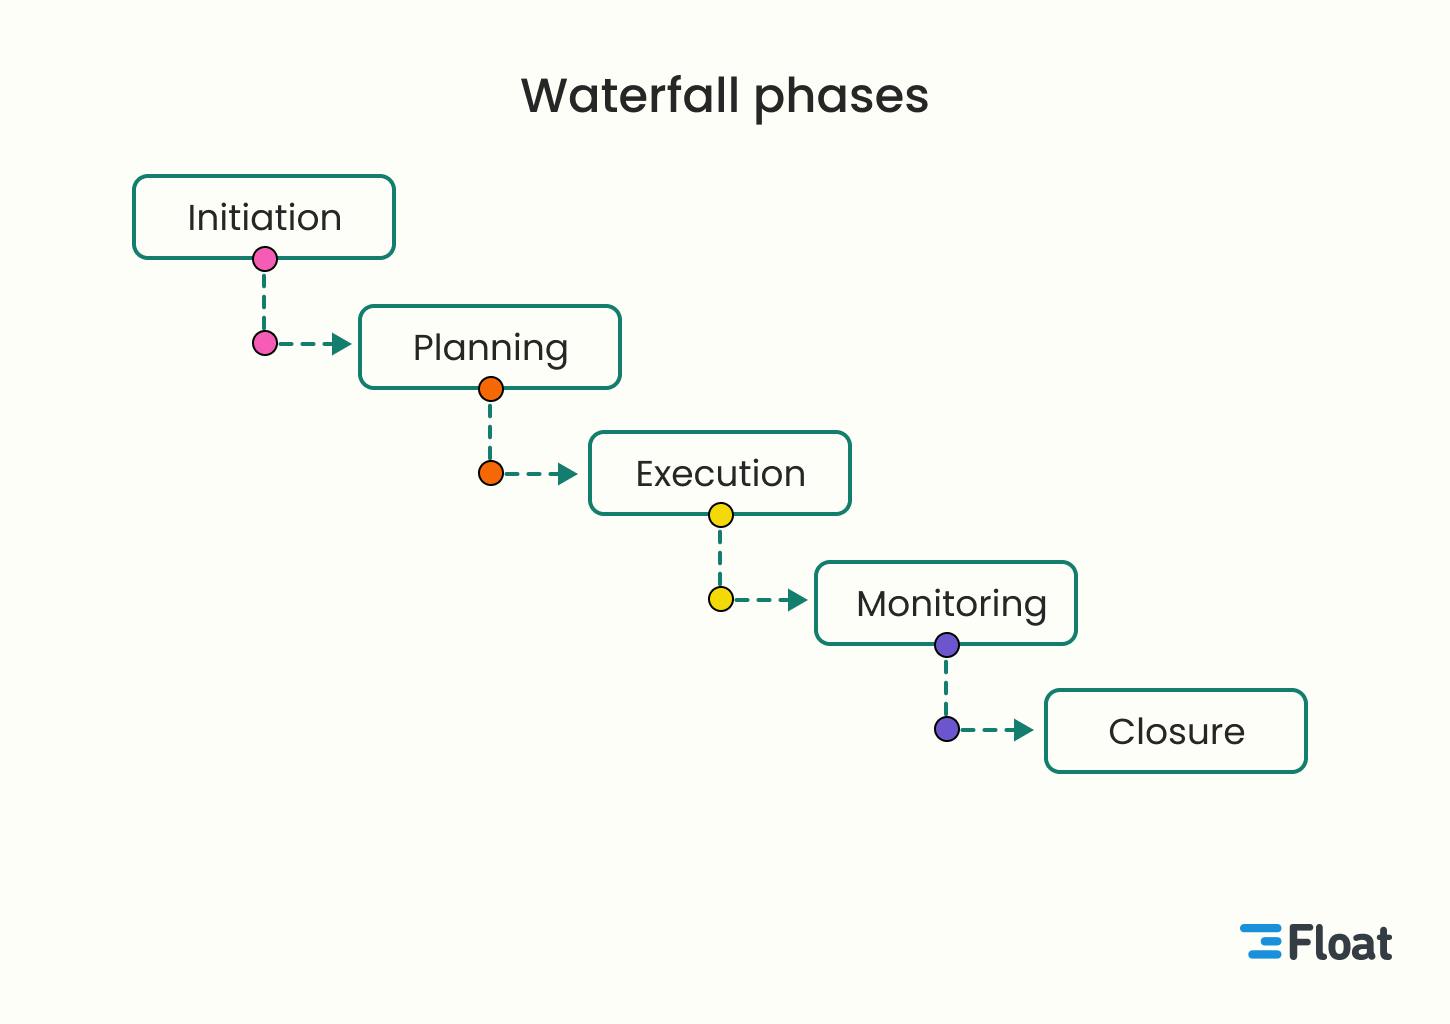 The traditional waterfall approach in five phases